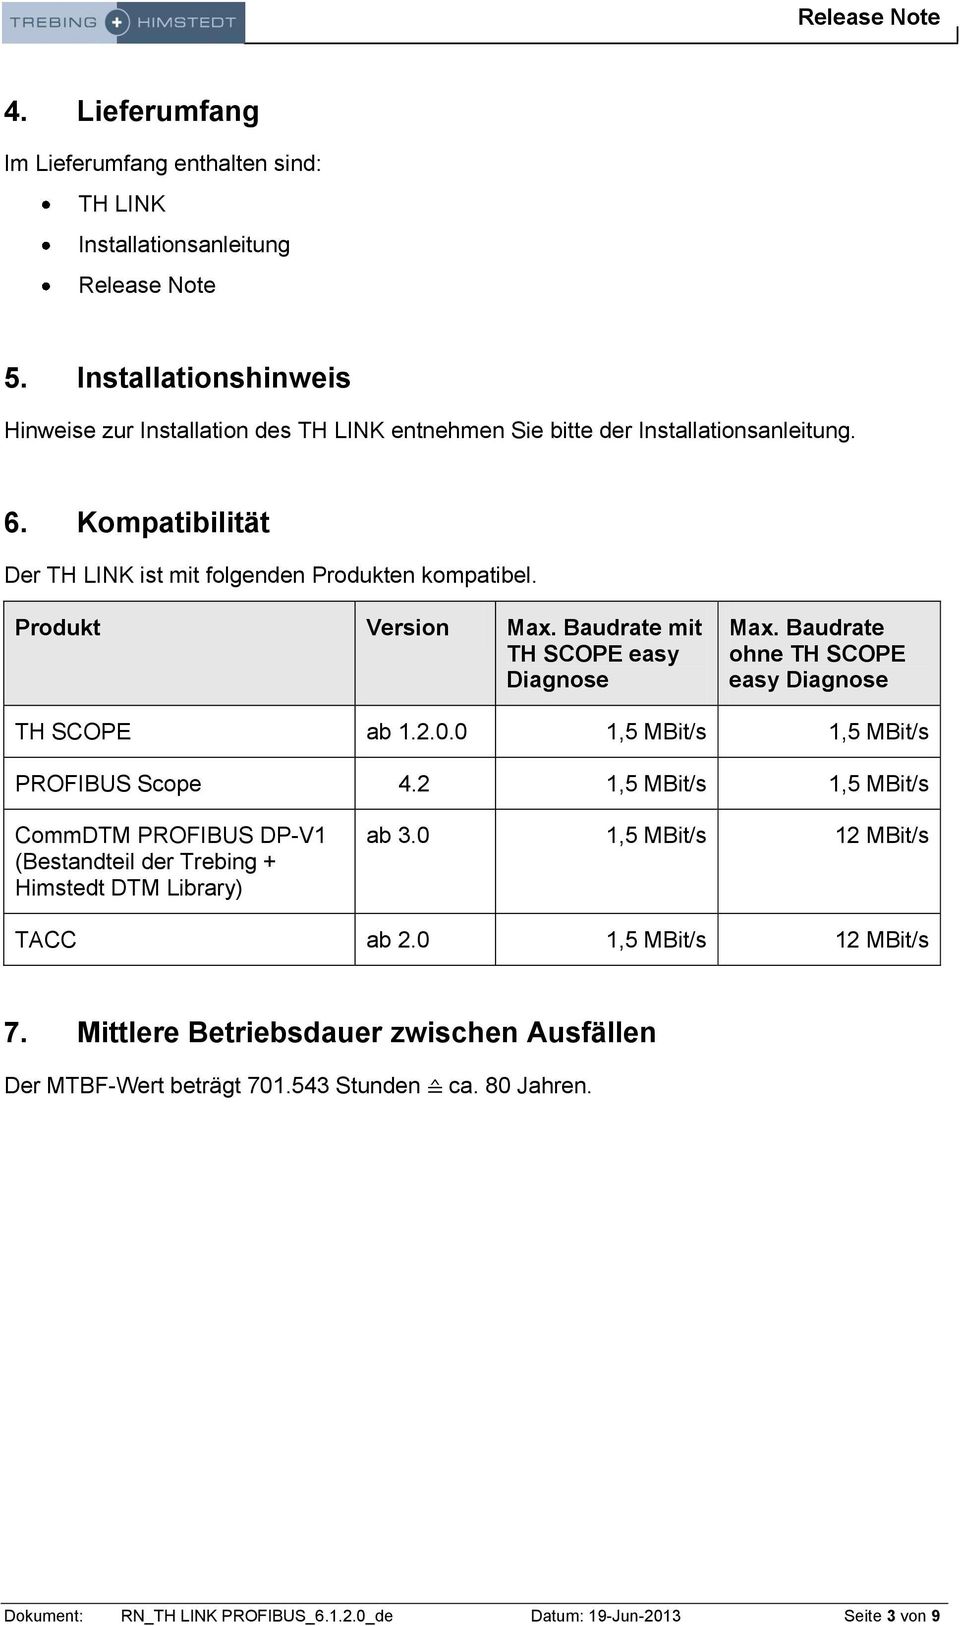 Produkt Version Max. Baudrate mit TH SCOPE easy Diagnose Max. Baudrate ohne TH SCOPE easy Diagnose TH SCOPE ab 1.2.0.0 1,5 MBit/s 1,5 MBit/s PROFIBUS Scope 4.